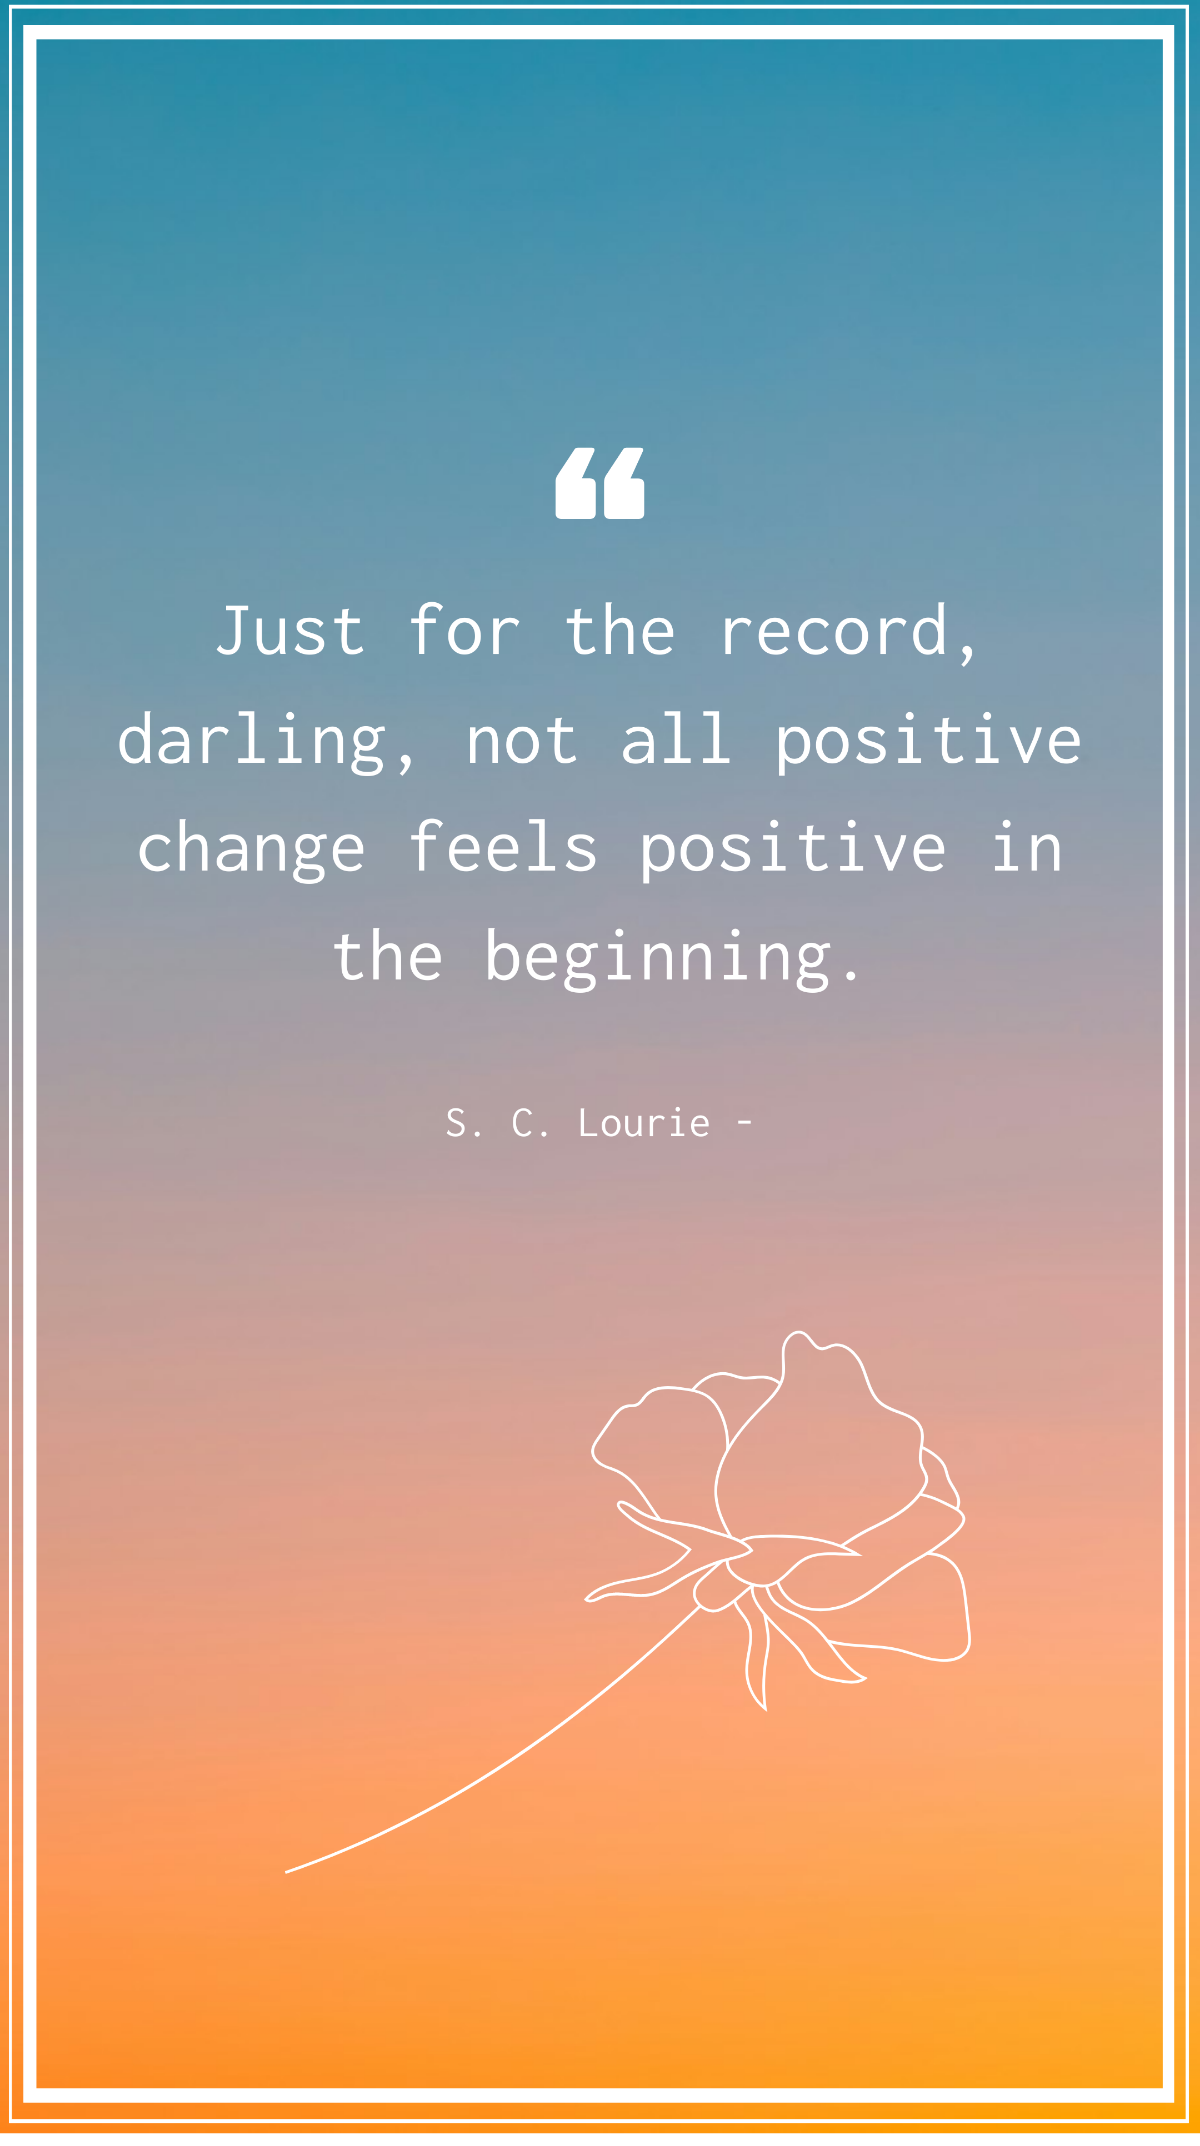 S. C. Lourie - Just for the record, darling, not all positive change feels positive in the beginning. Template